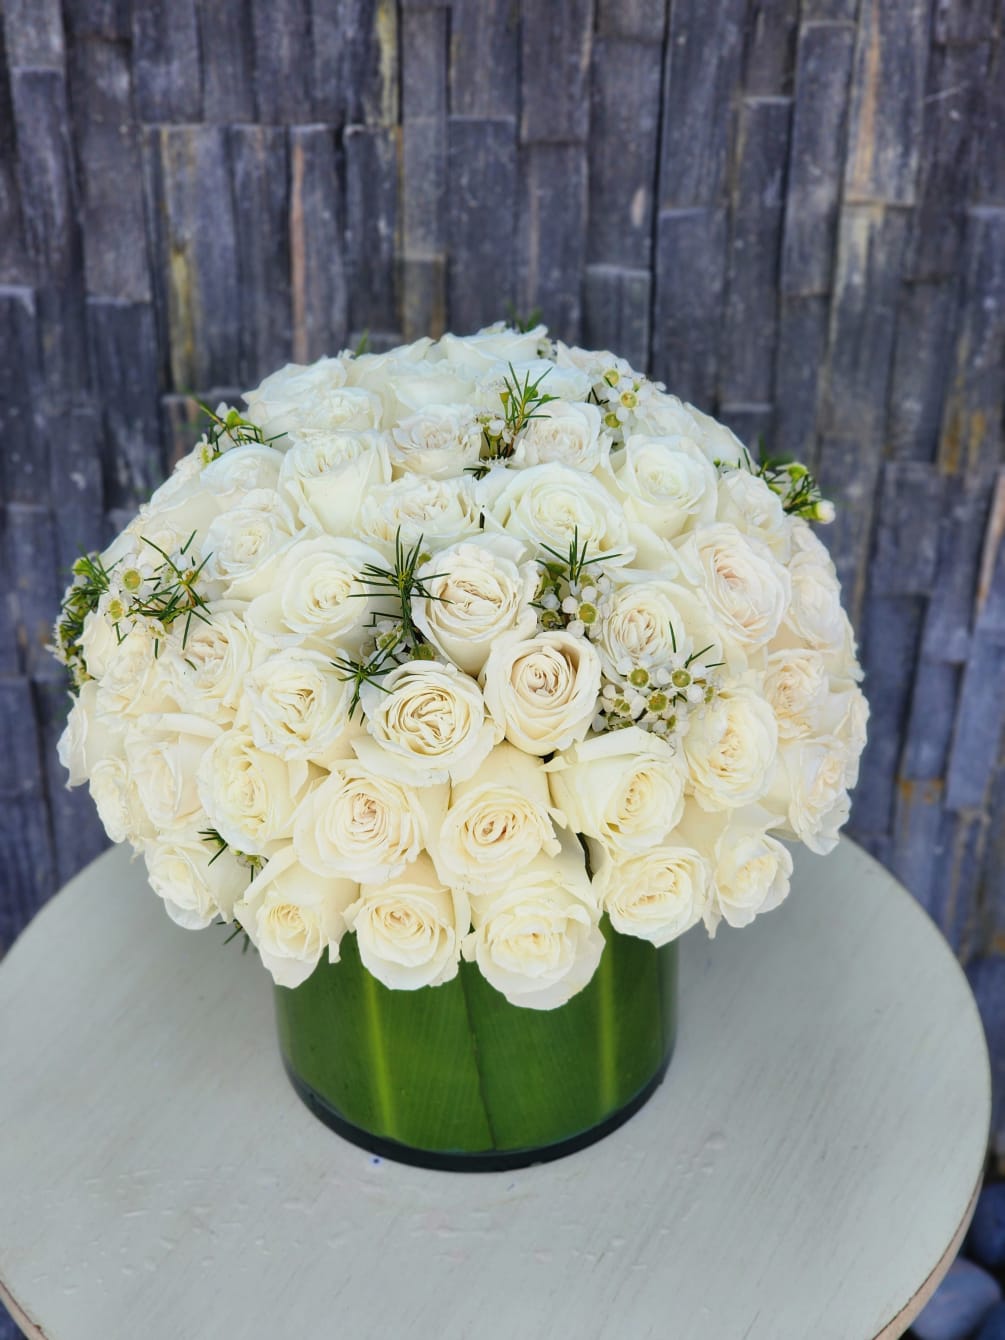 White roses symbolize harmony and purity, devotion. They symbolize purity, love, innocence